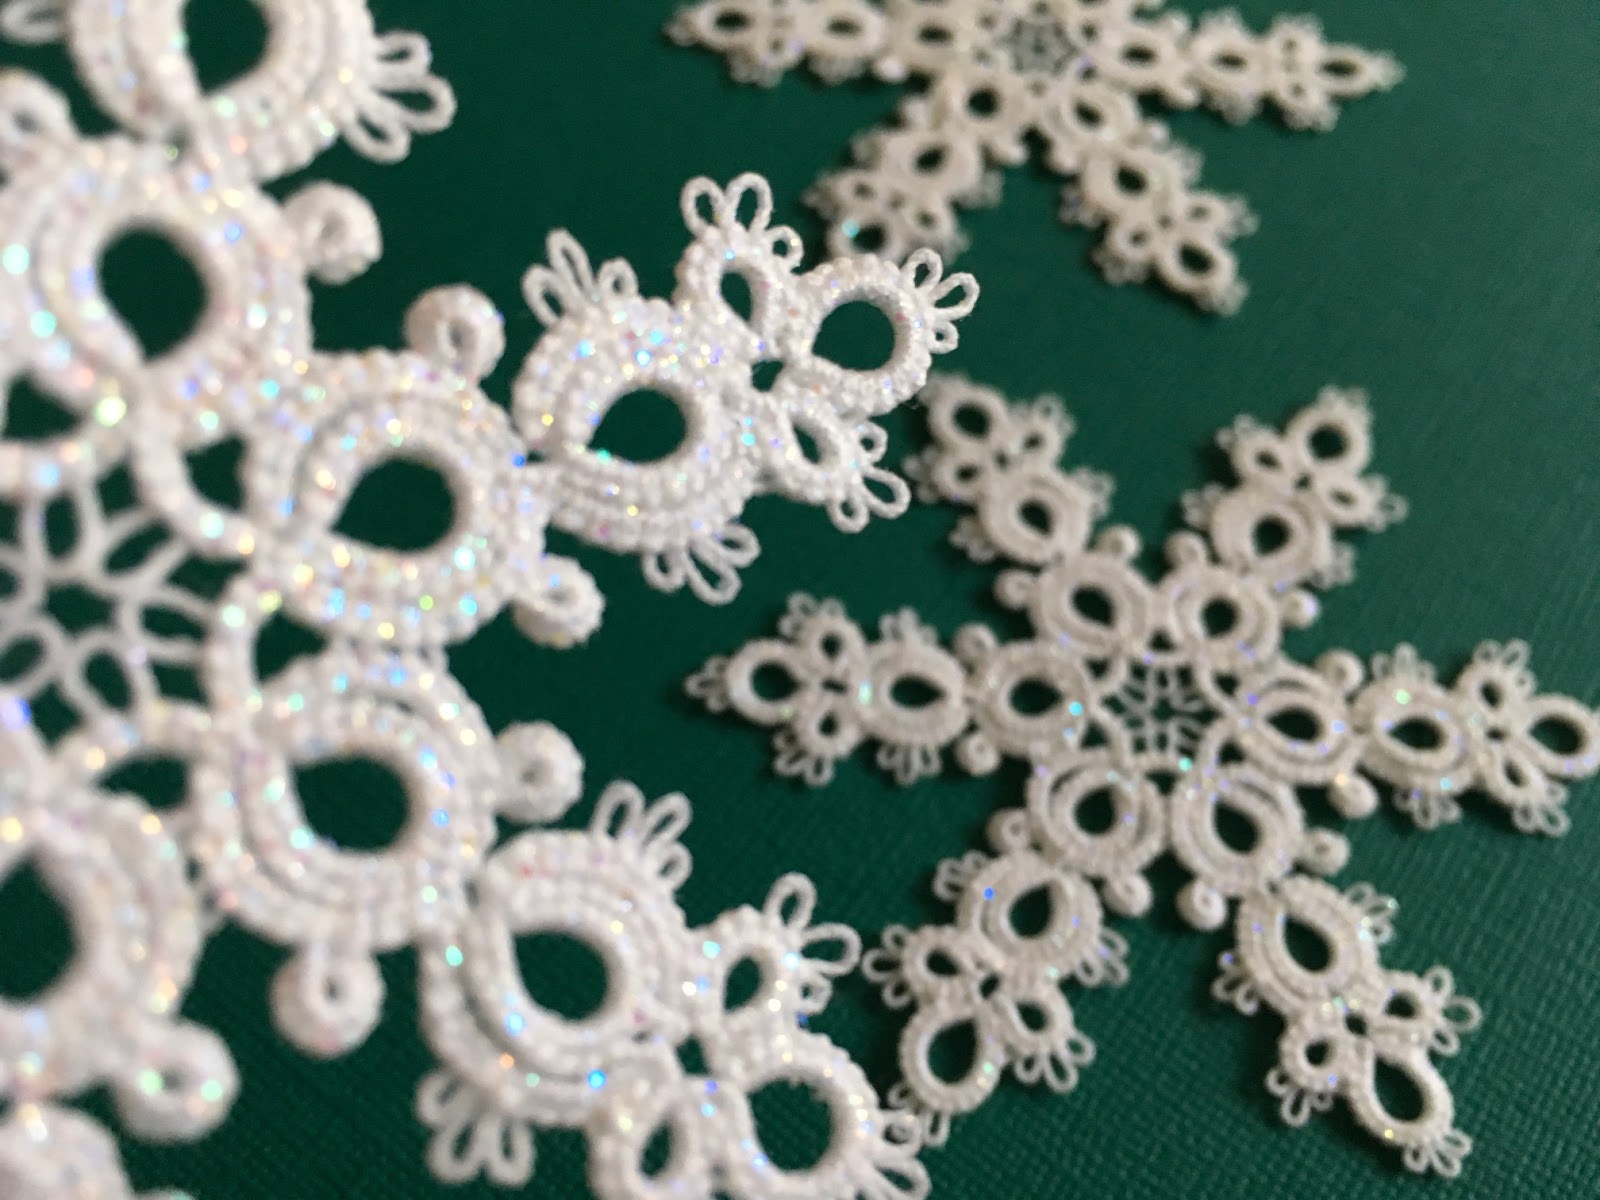 Tatting by the Bay: Testing out Fabric Stiffeners